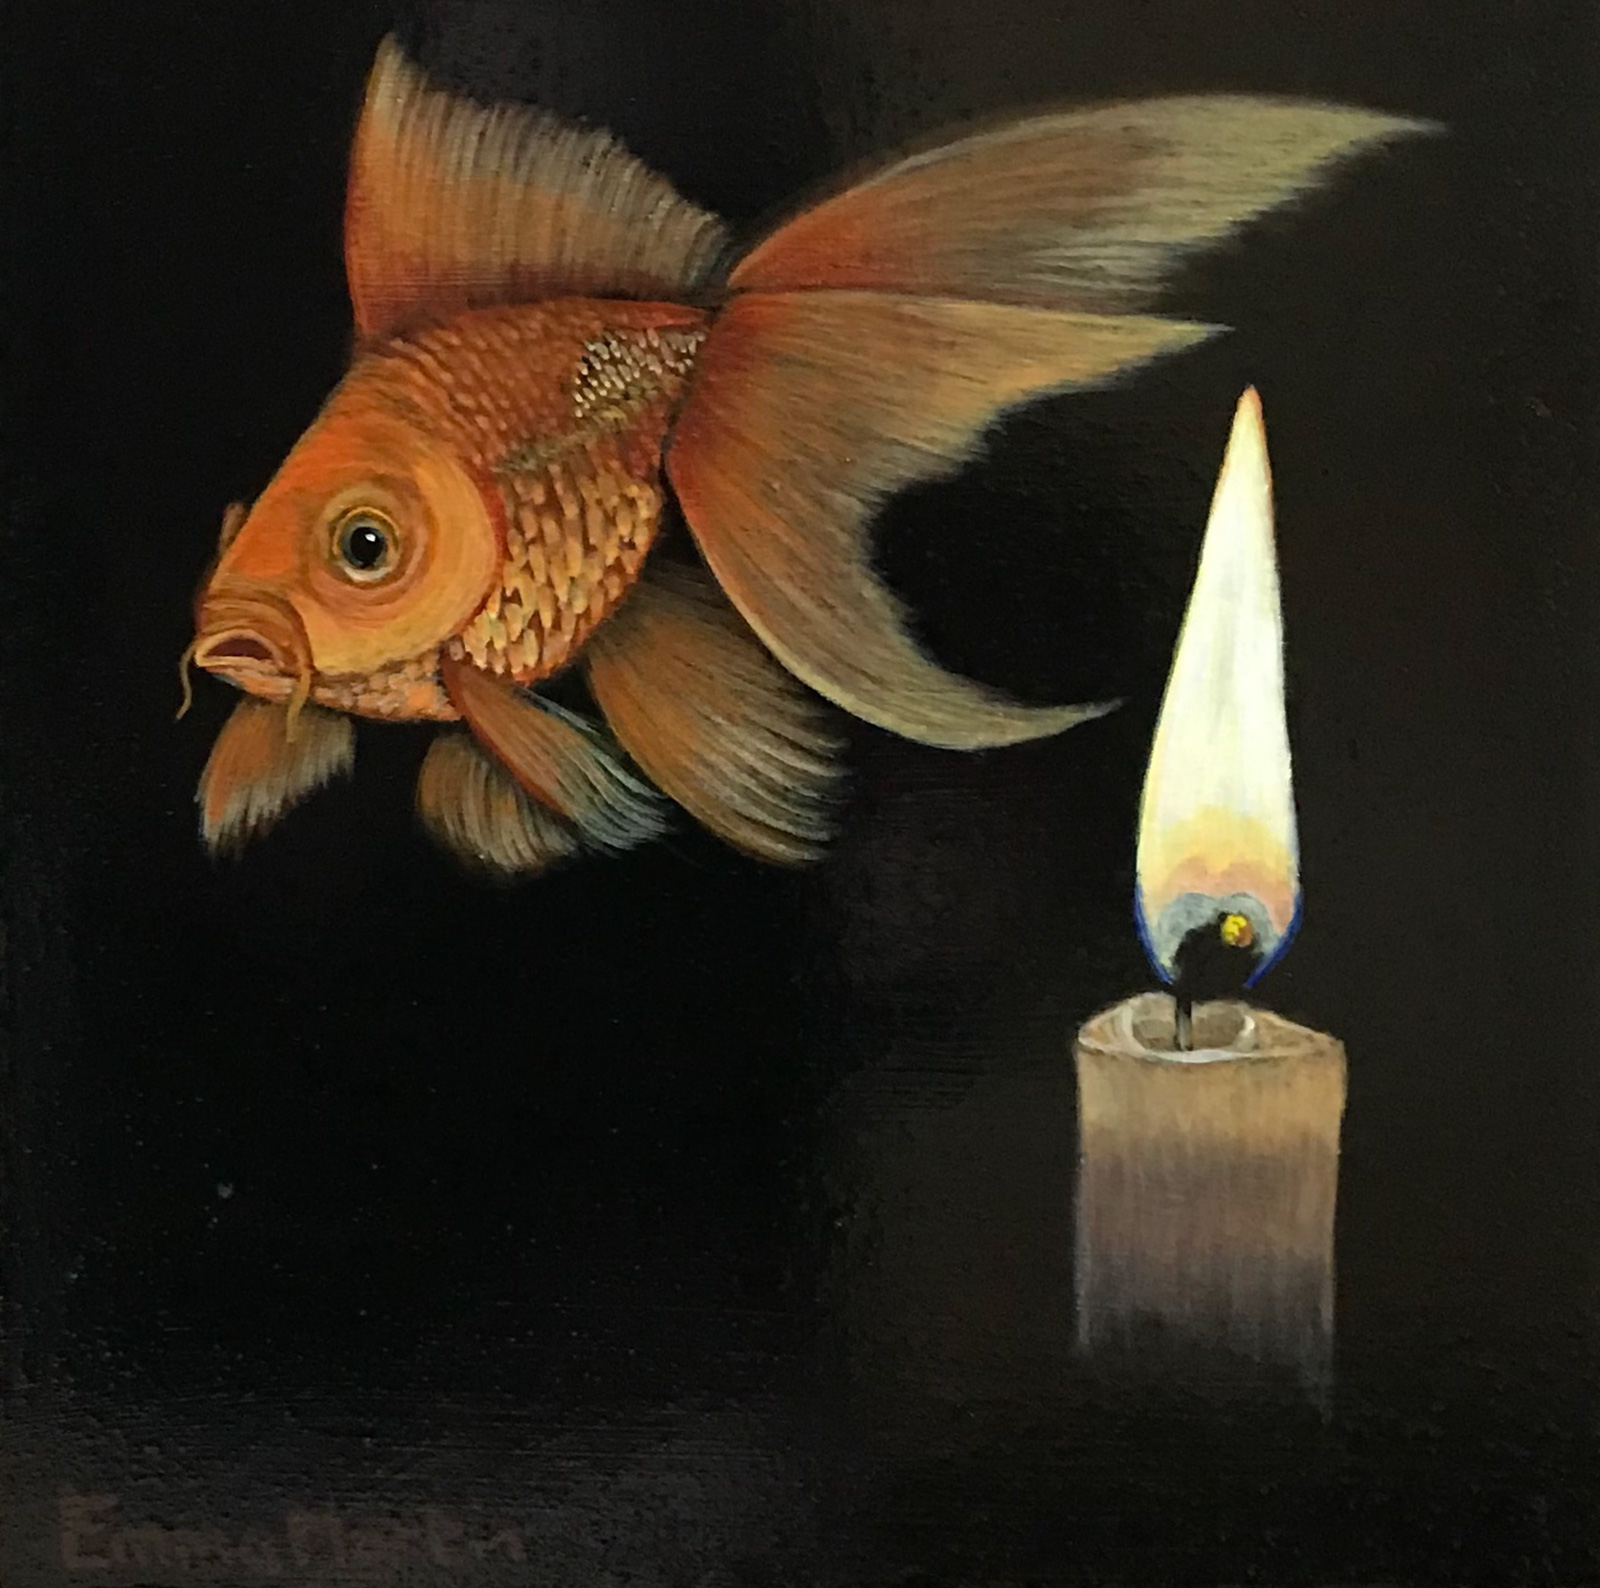 A painting of a goldfish swimming to the left of a stage-right close up, lit candle. The background is plain black and at the bottom left of the image there is faded white writing which reads 'Emma Martin'.